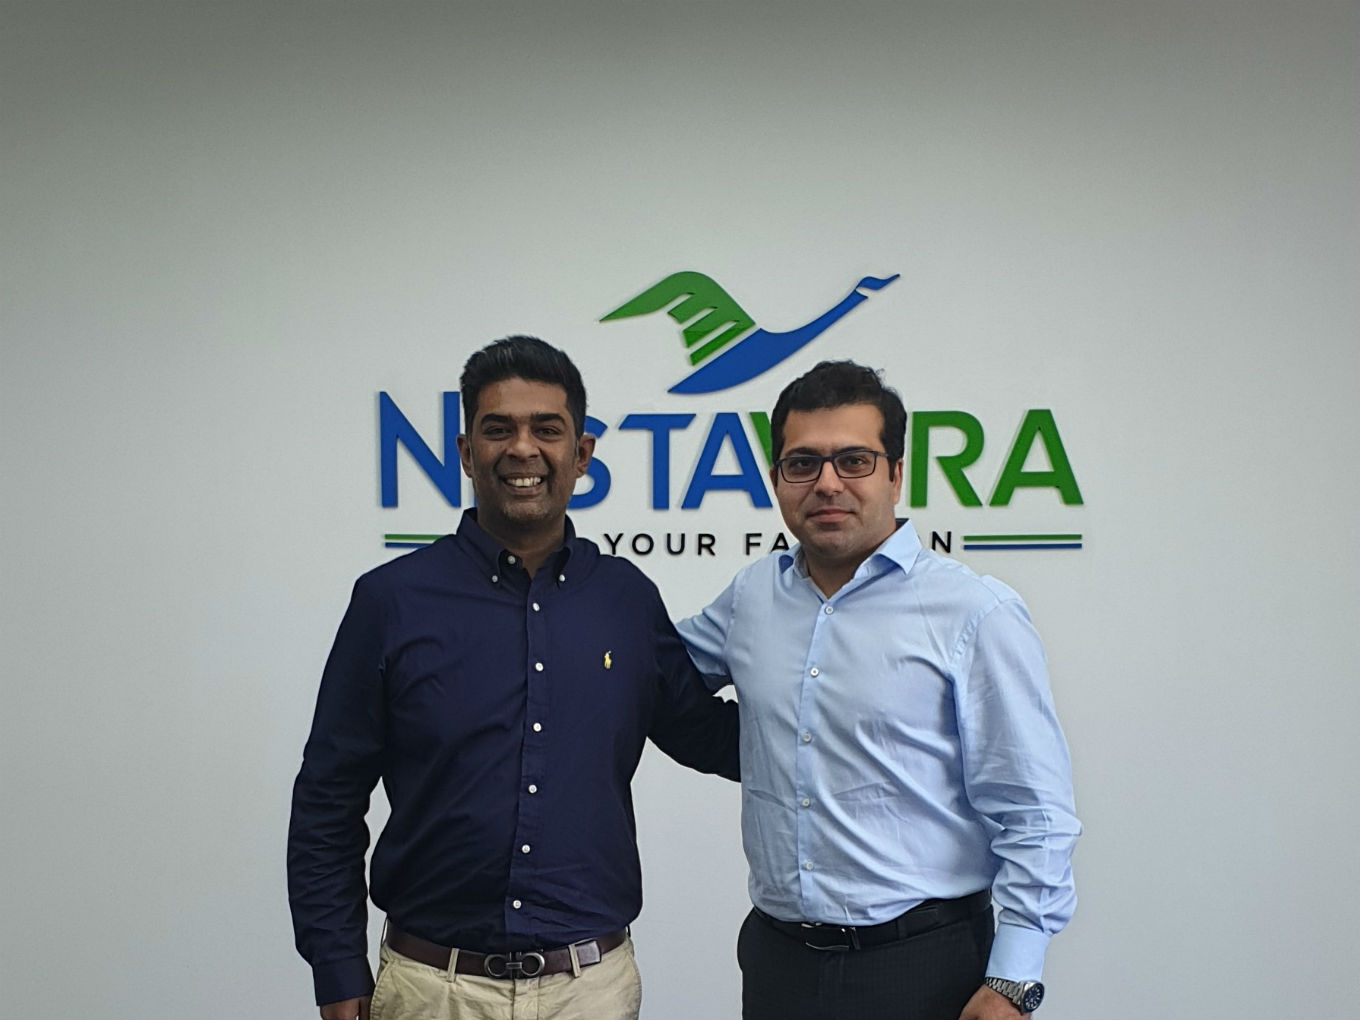 NestaVera Invests In Healthtech Startup ProPhysio To Accelerate Growth